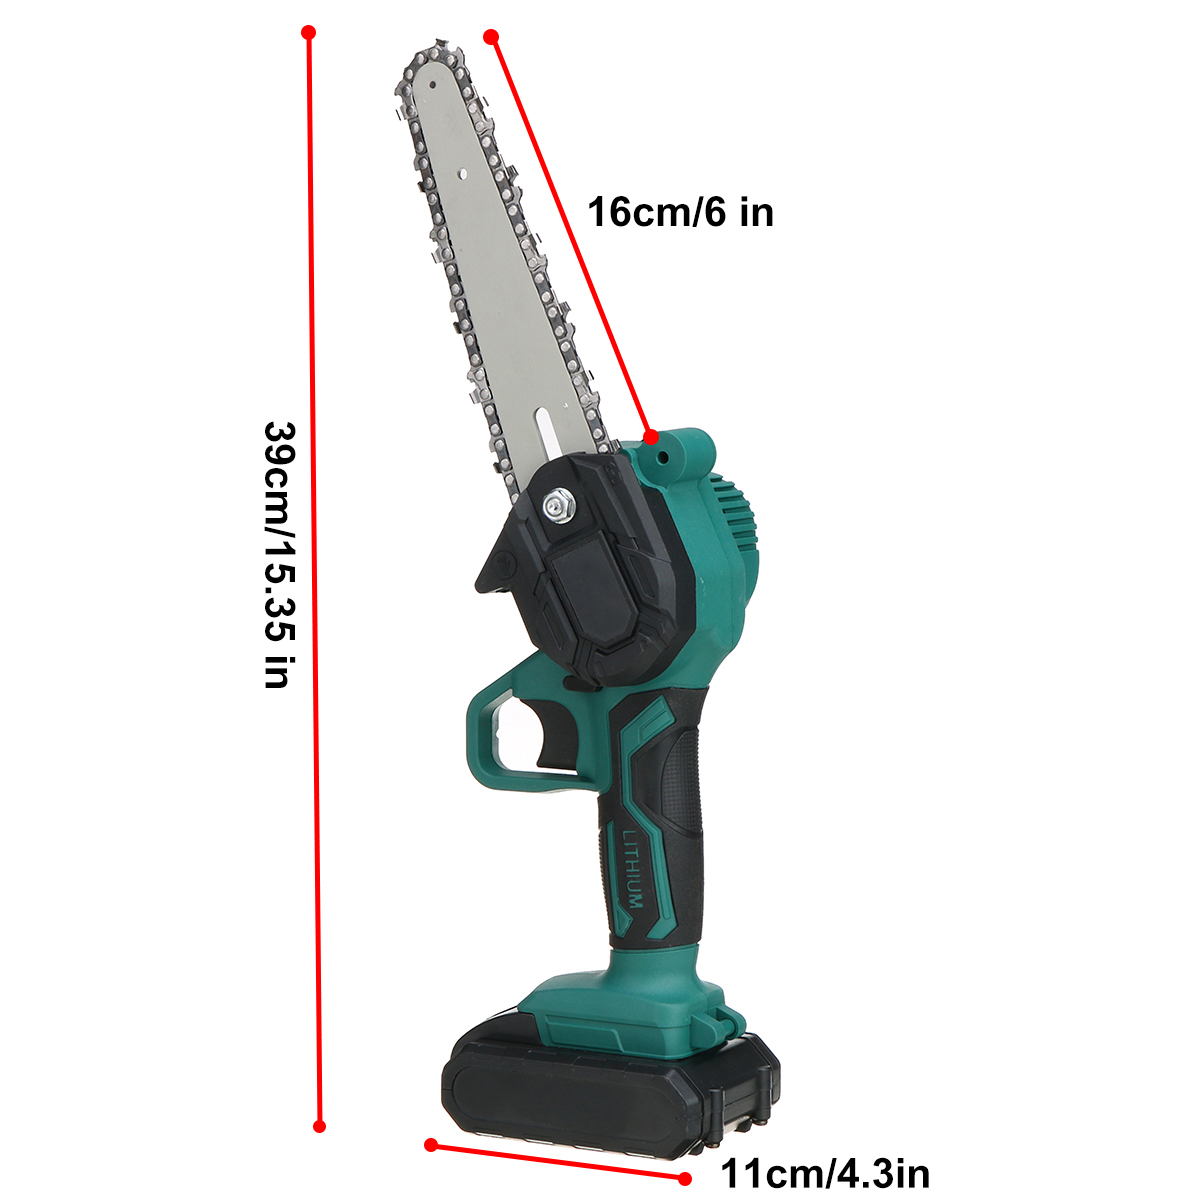 6inch-600W-Portable-Electric-Chain-Saw-Rechargeable-Saws-Wood-Cutter-Woodworking-Tool-W-2pcs-Battery-1827209-9